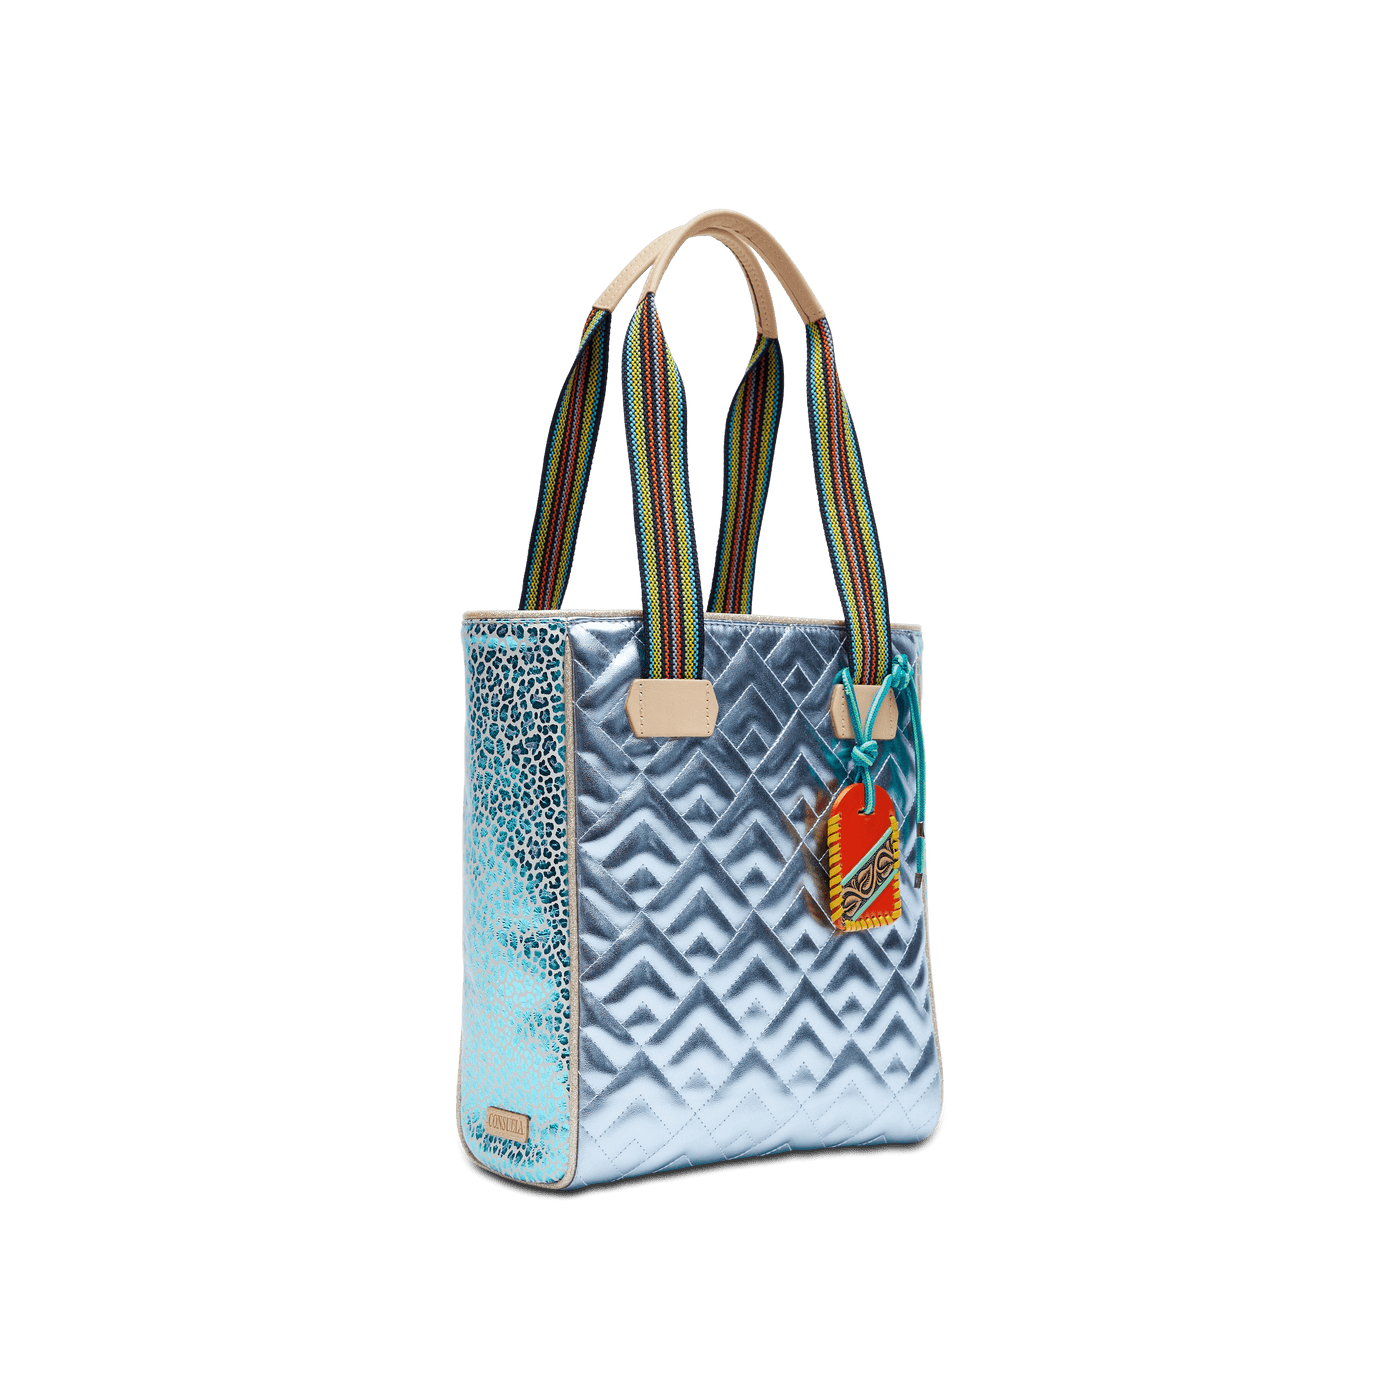 Consuela Chica Tote - Kat-110 Handbags-Consuela-Market Street Nest, Fashionable Clothing, Shoes and Home Décor Located in Mabank, TX